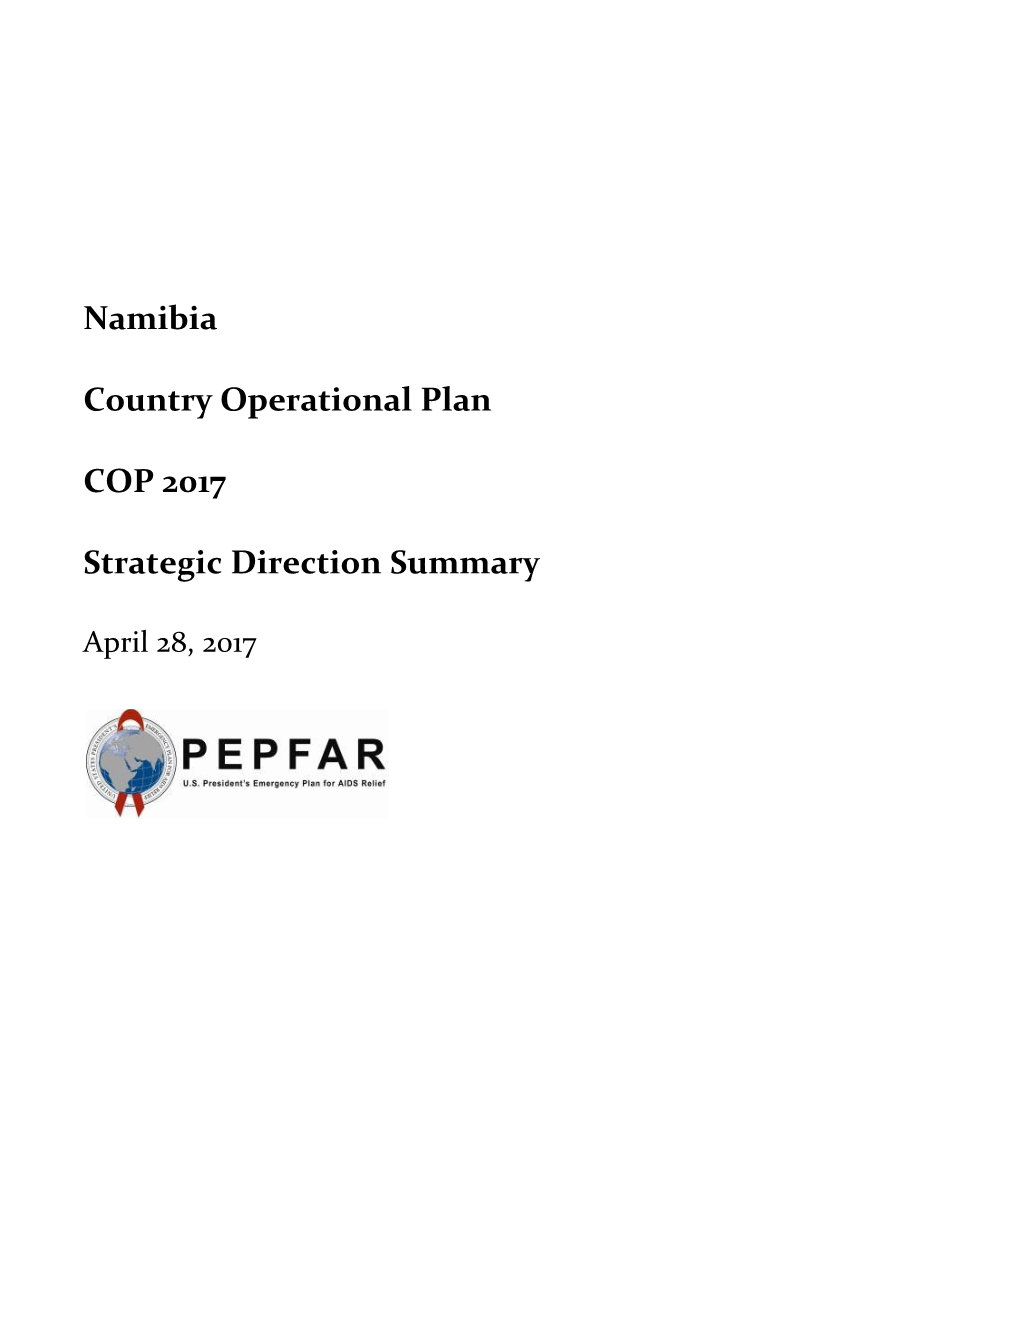 Namibia Country Operational Plan COP 2017 Strategic Direction